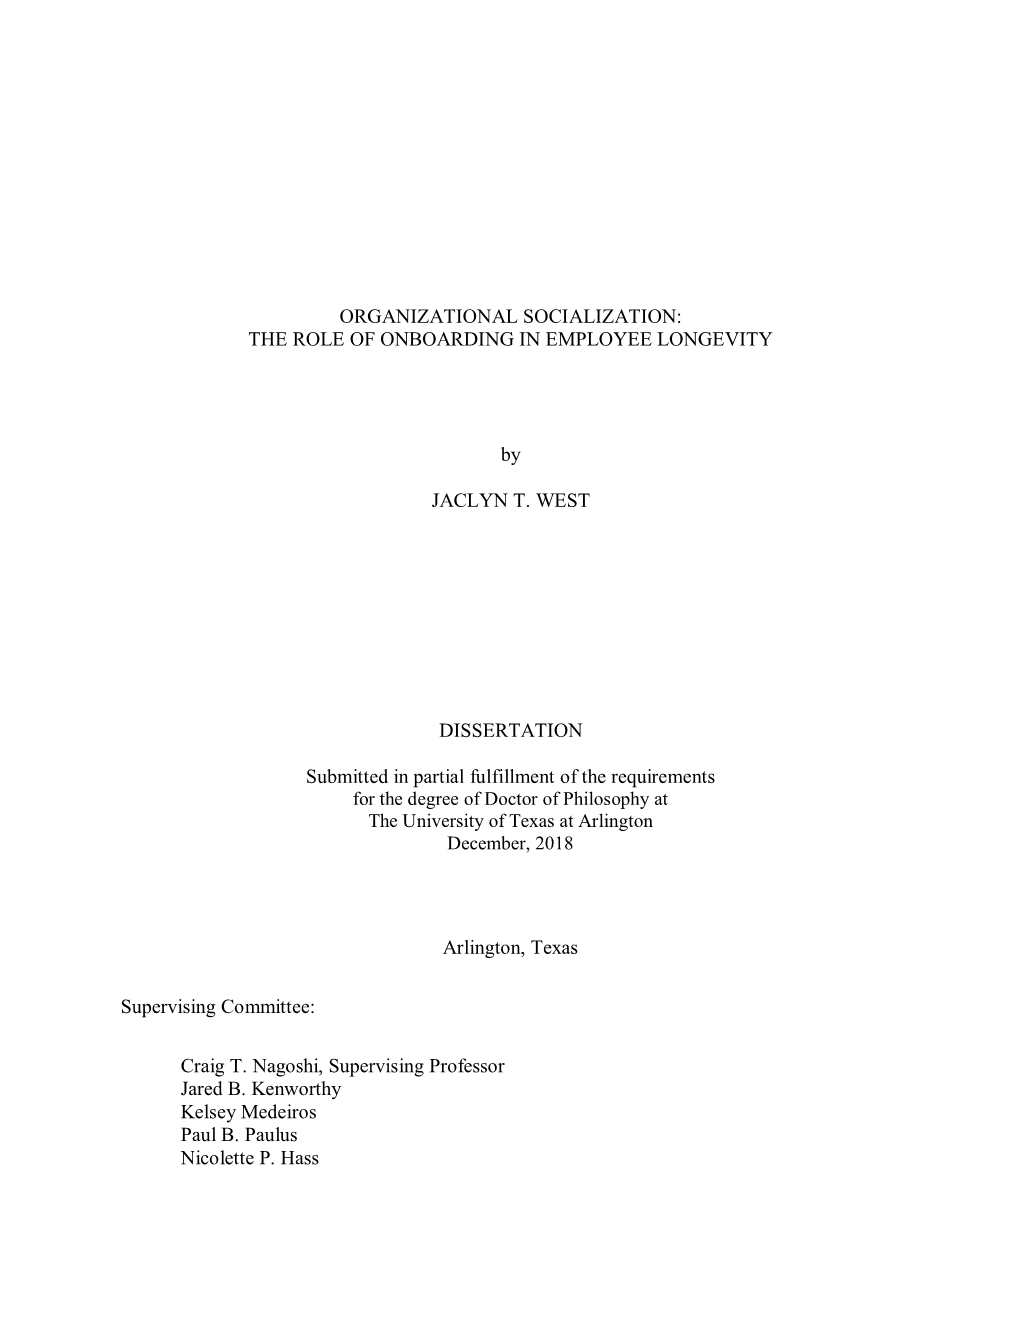 ORGANIZATIONAL SOCIALIZATION: the ROLE of ONBOARDING in EMPLOYEE LONGEVITY by JACLYN T. WEST DISSERTATION Submitted in Partial